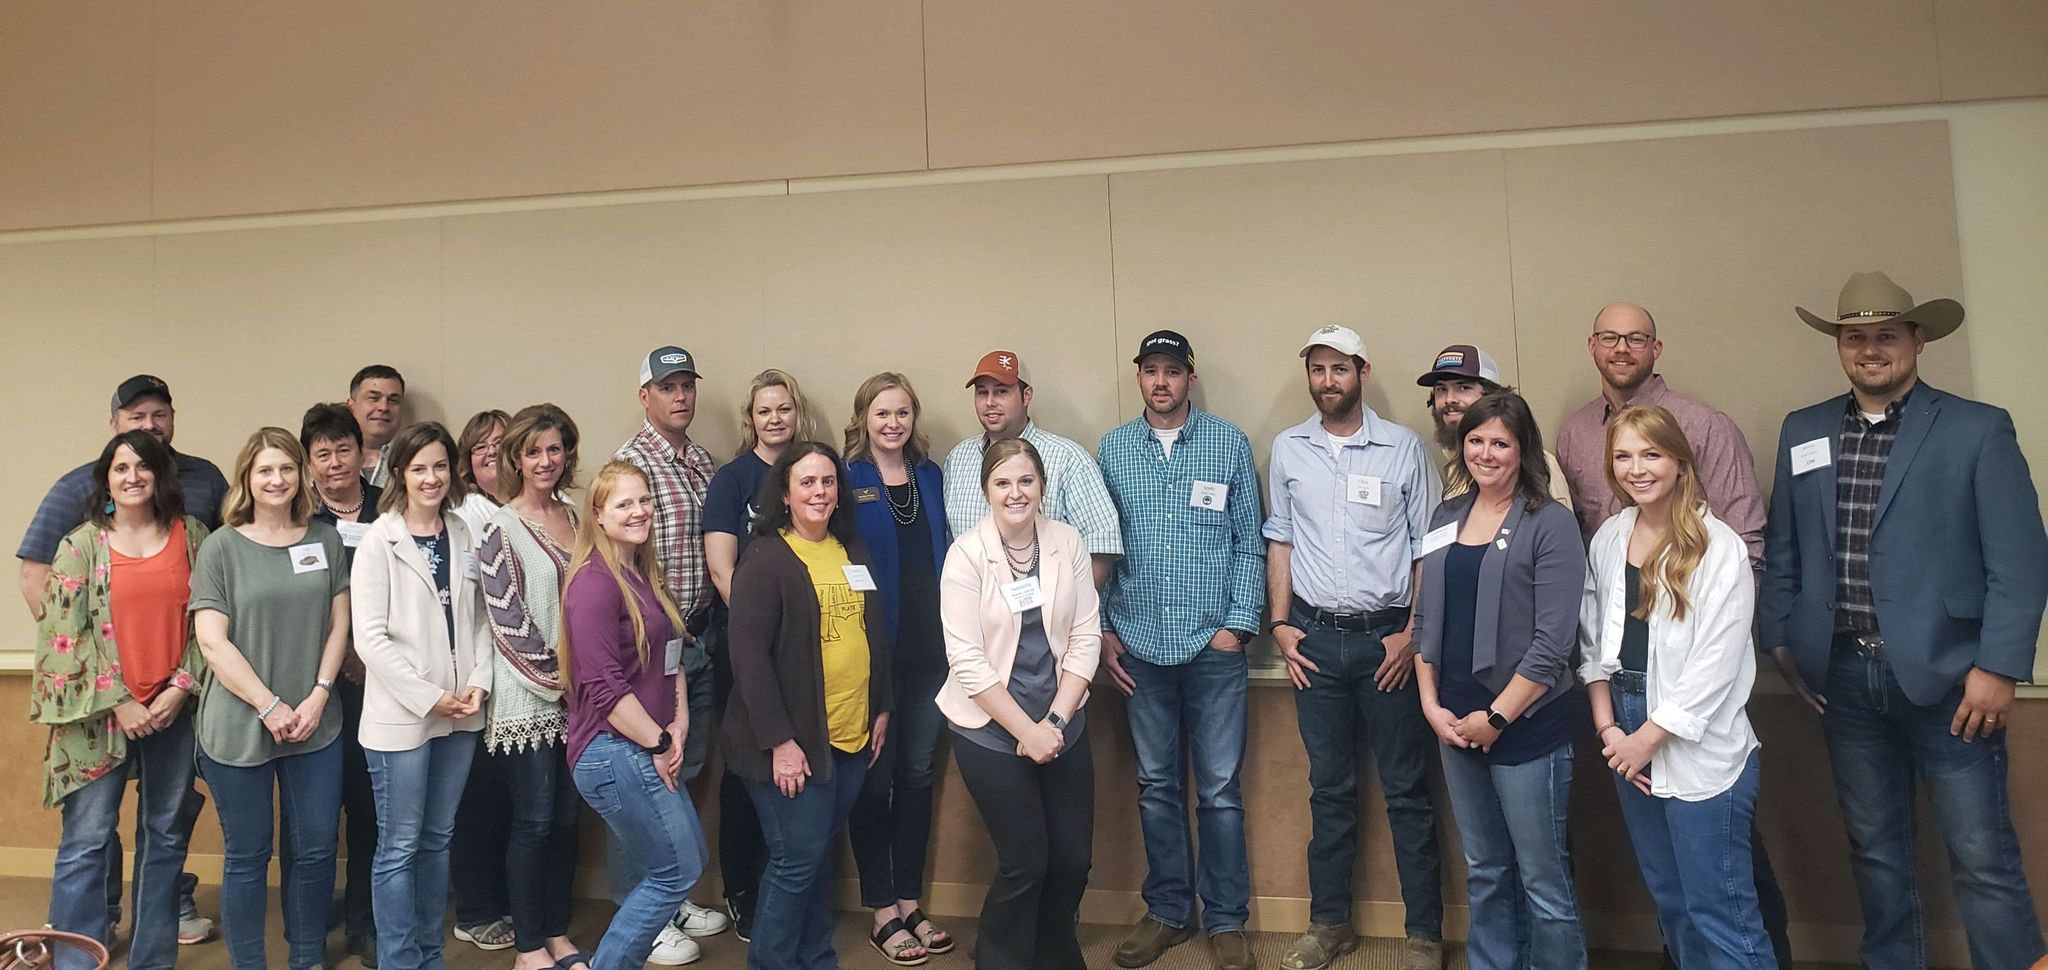 BEEF PRODUCERS FROM ACROSS THE NORTHEAST REGION GATHER FOR WORKSHOP